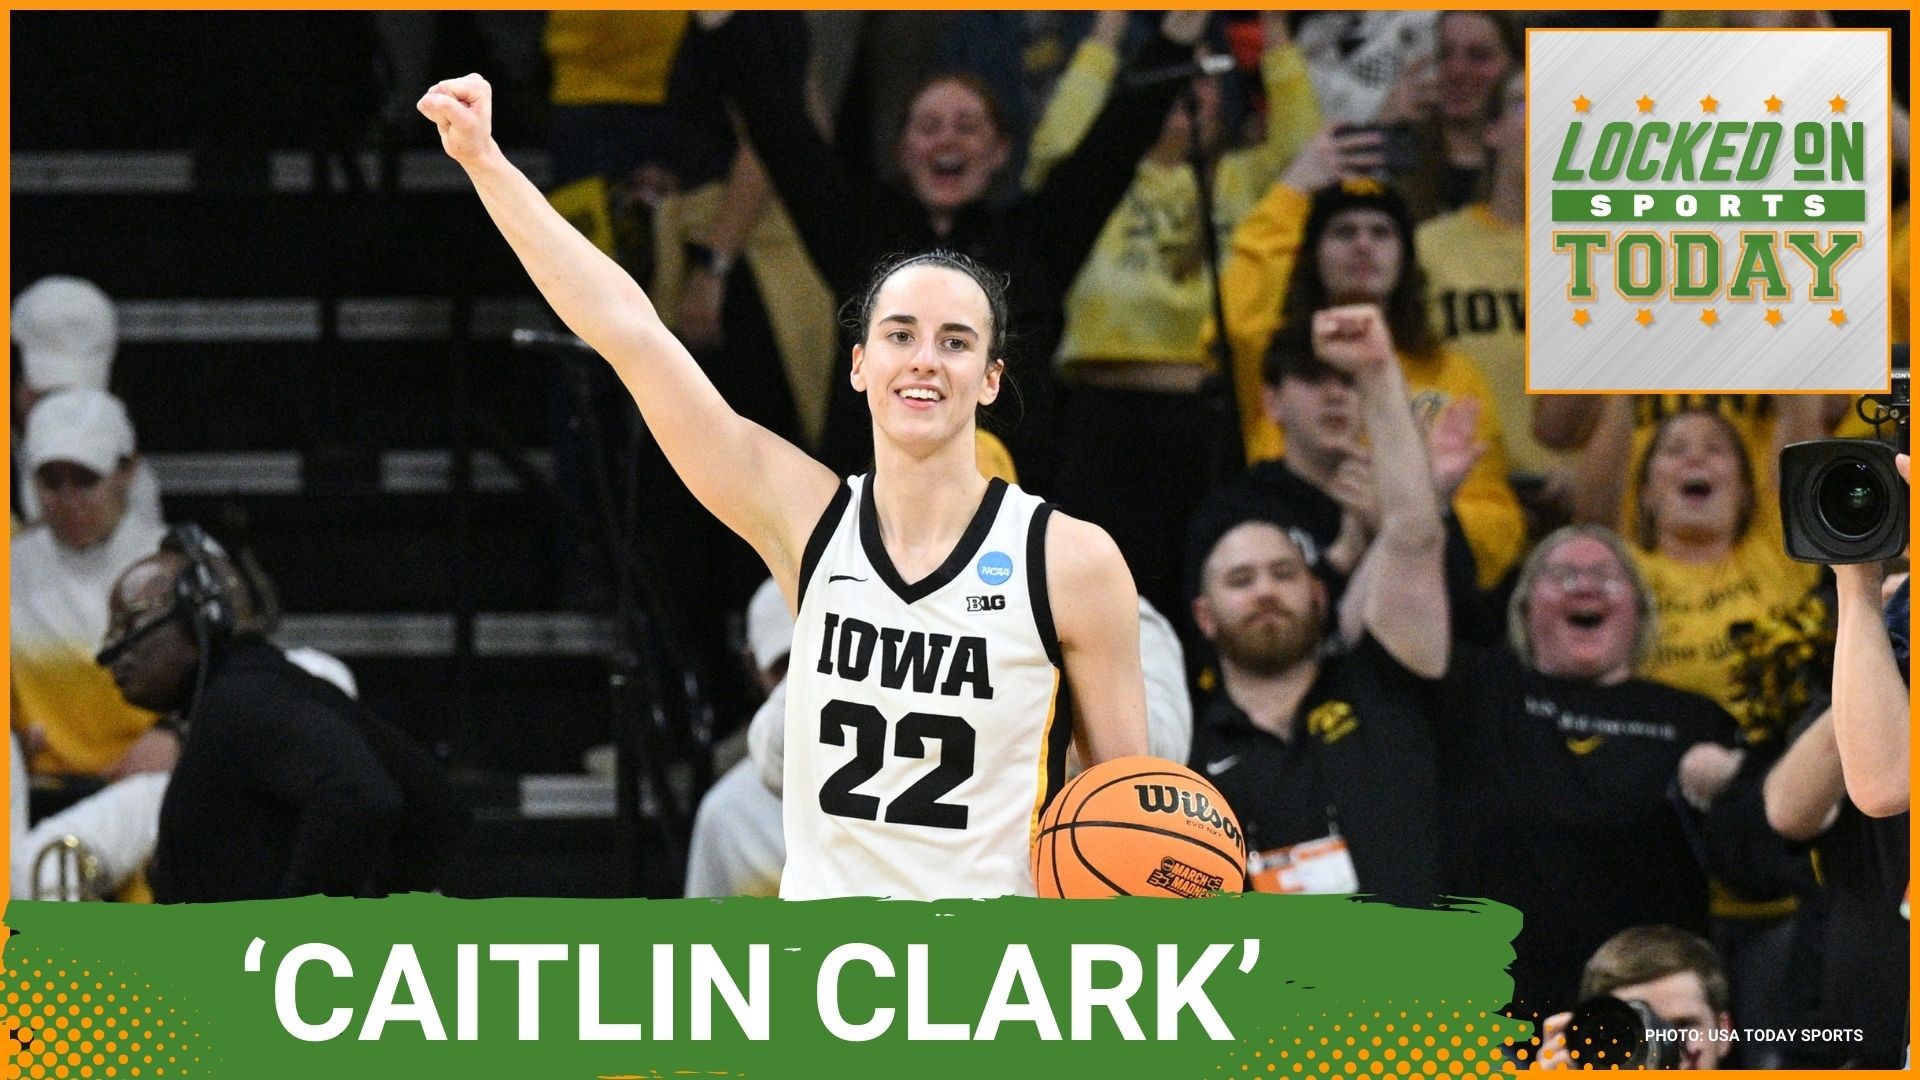 Discussing the day's top sports stories from Caitlin Clark and the Iowa Hawkeyes going to the Sweet Sixteen to are the Dallas Cowboys a "mom and pop shop?"